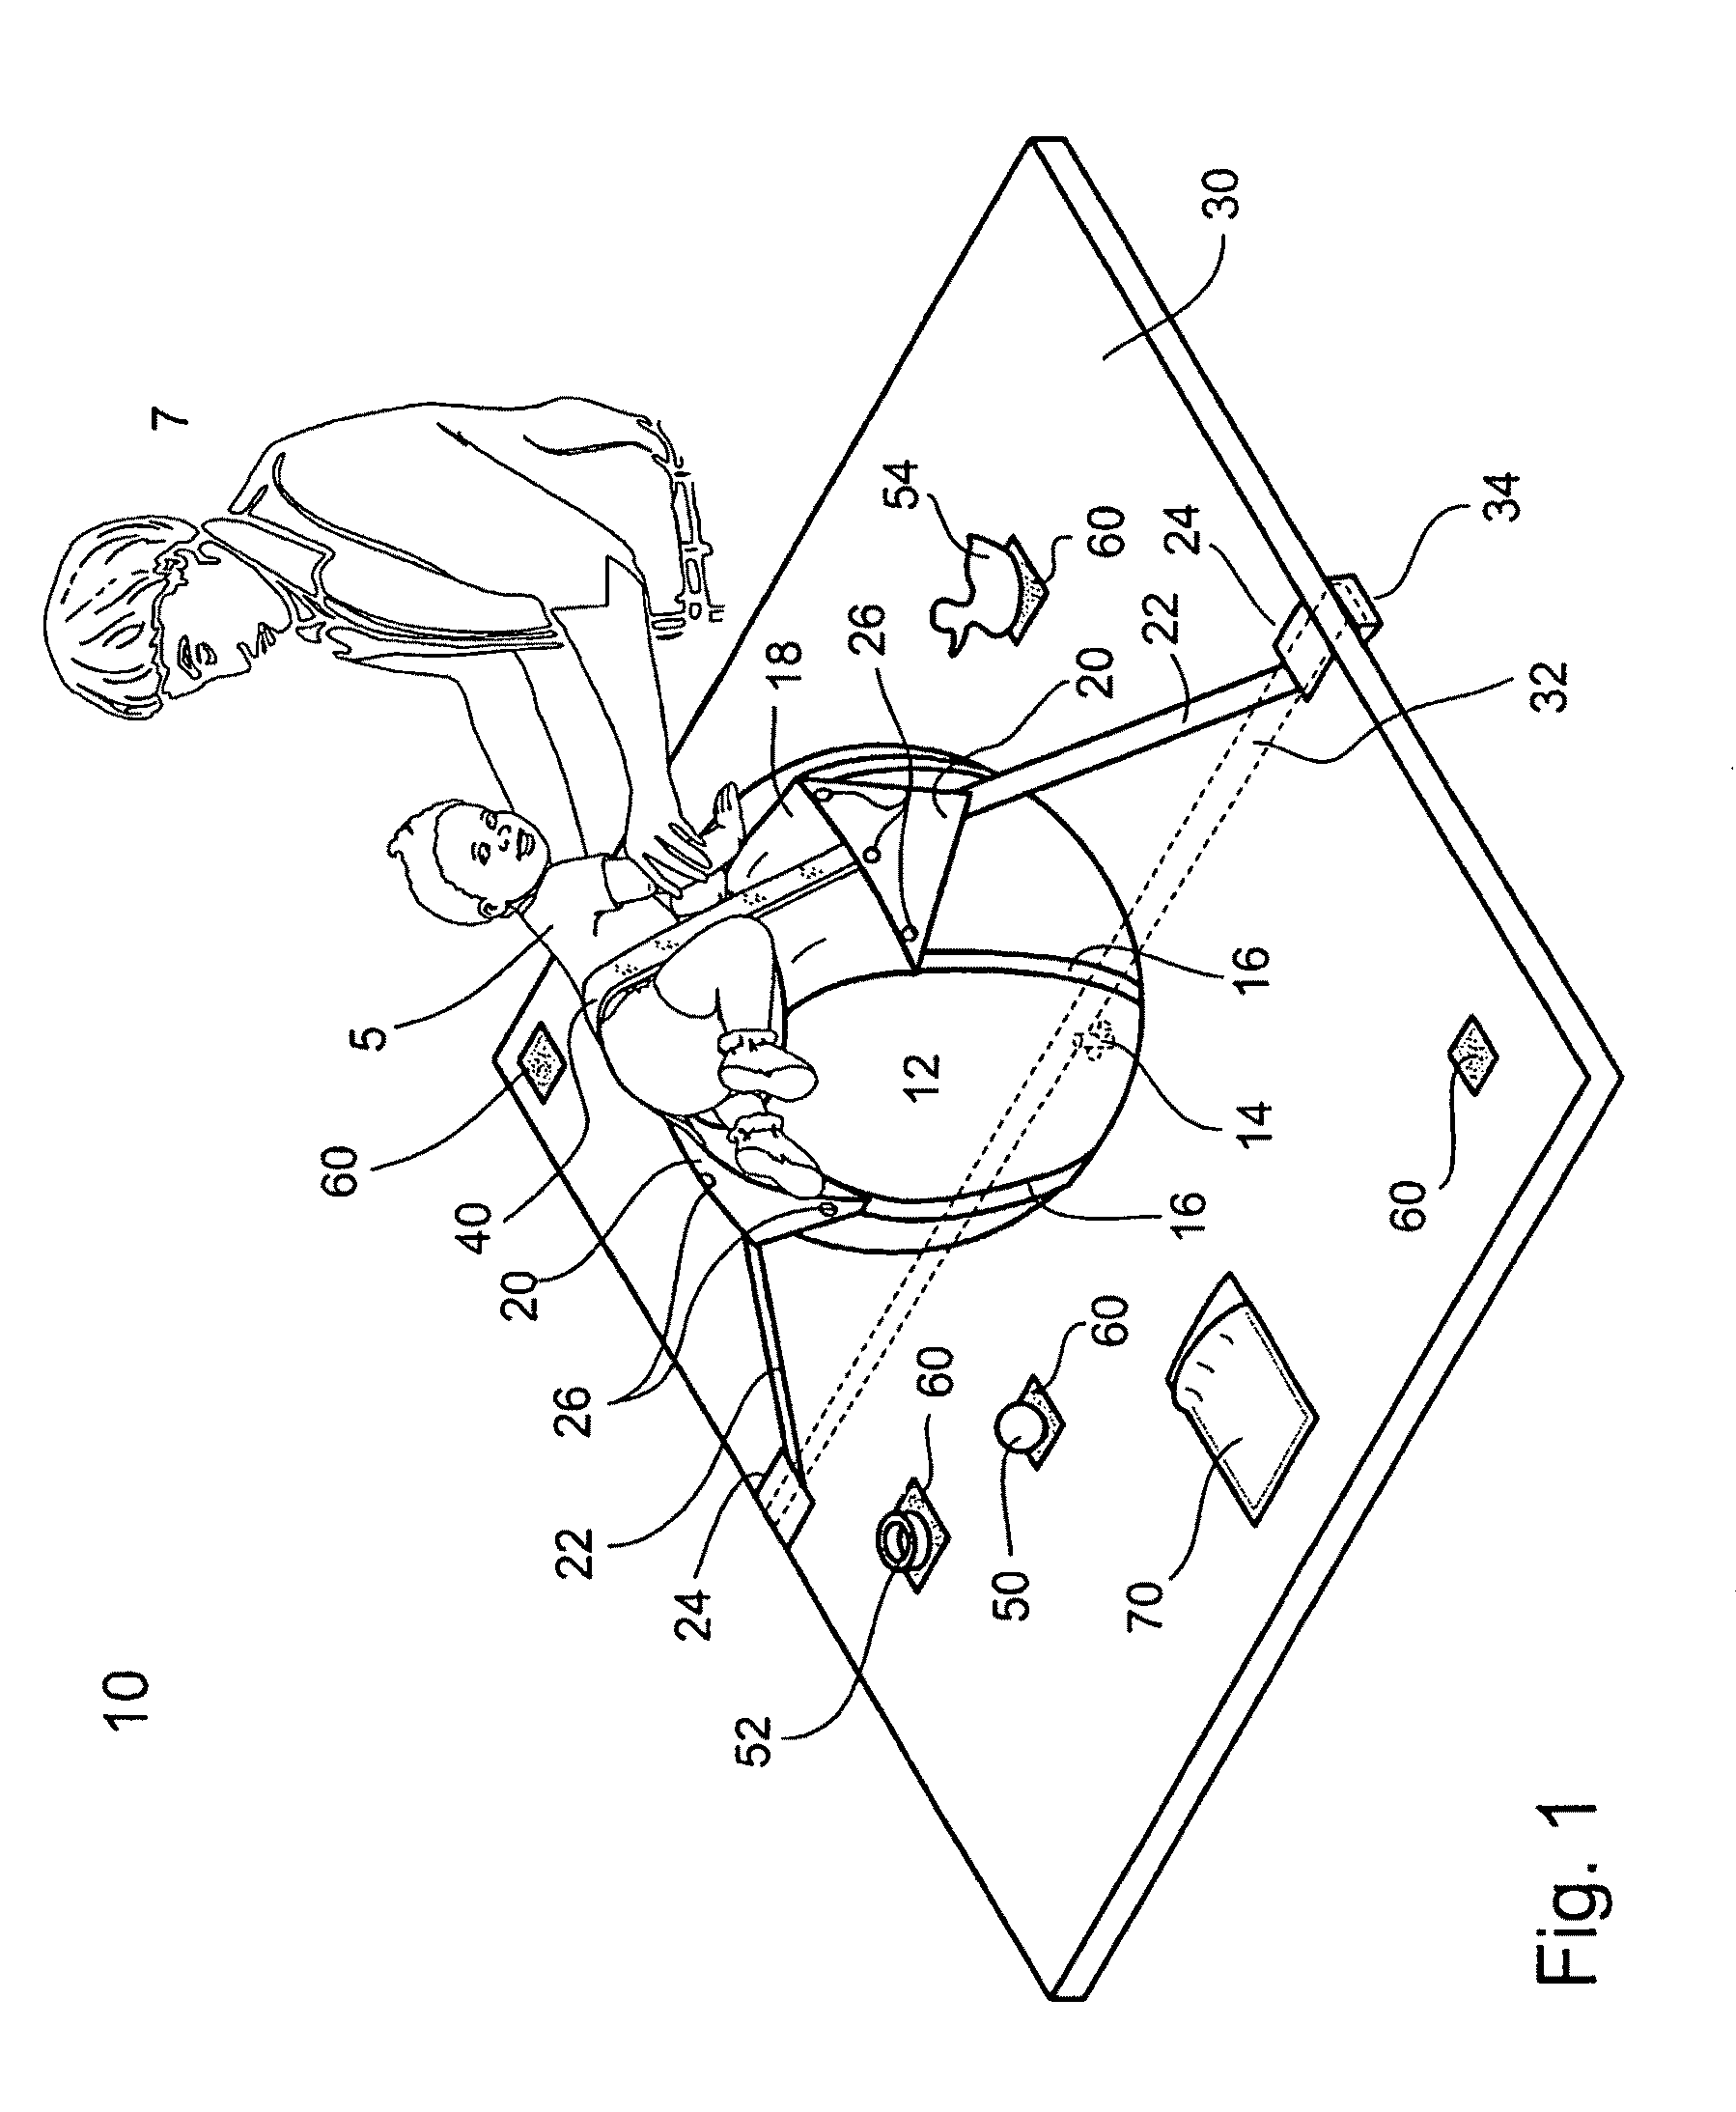 Device and method for occupying a human subject with physical and mental activities